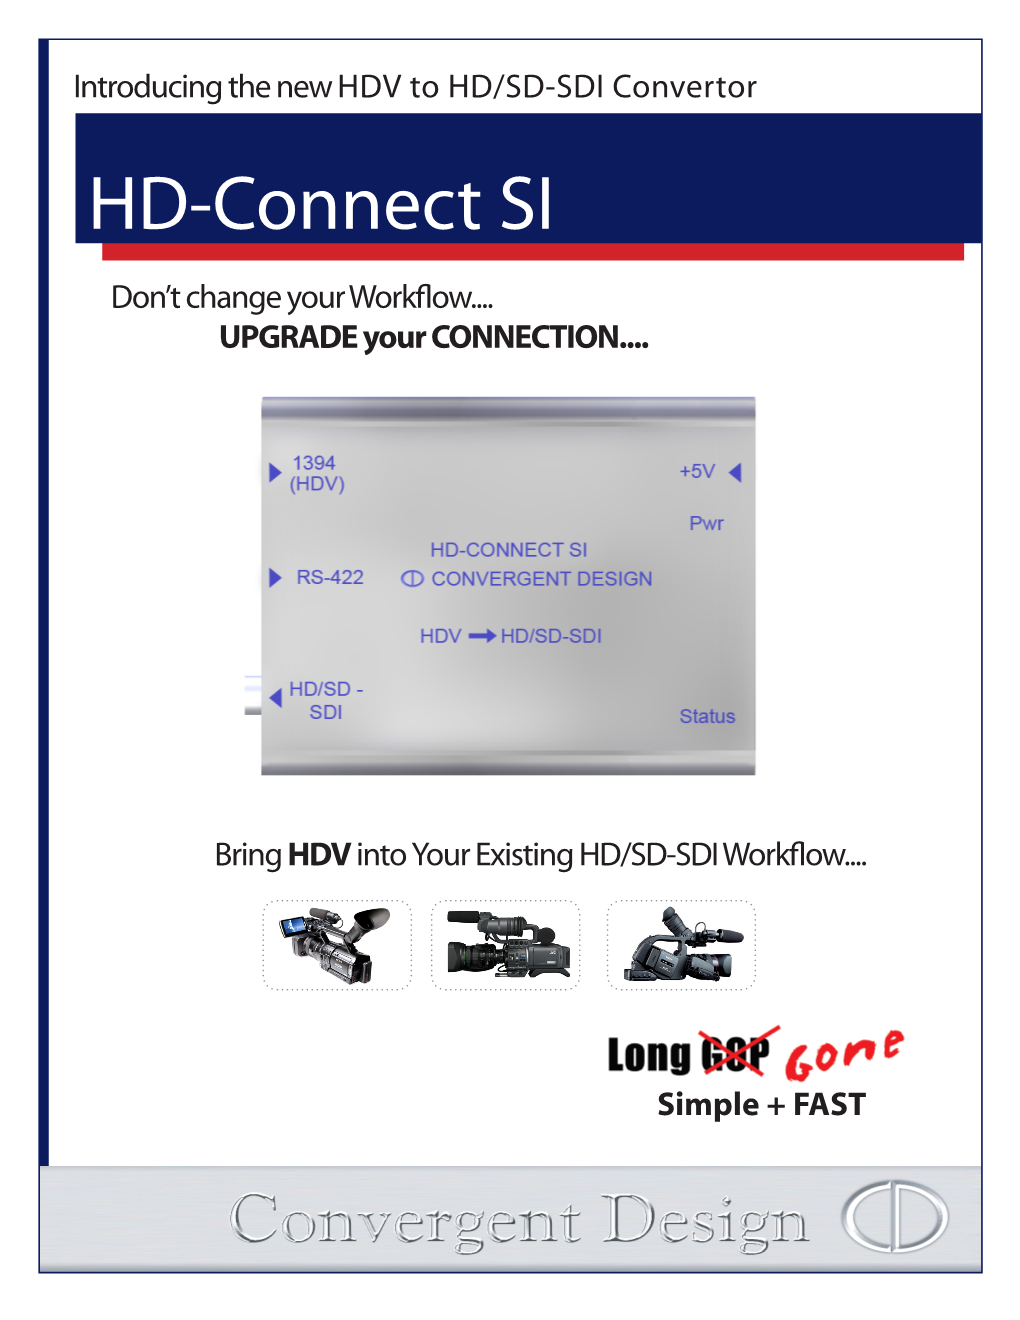 HD-Connect SI